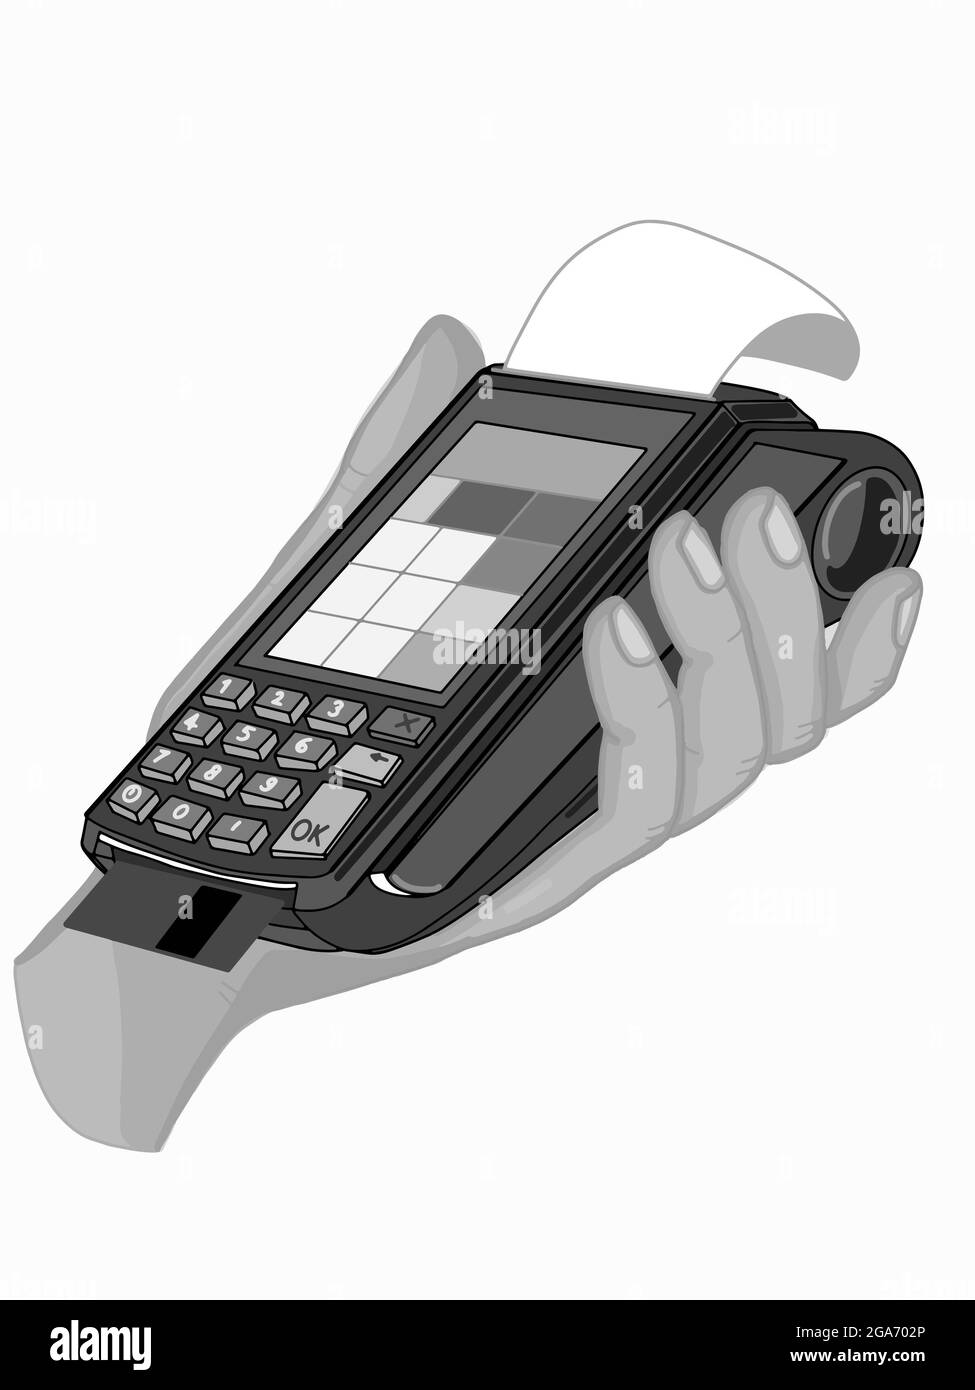 POS device, illustration icon, holding hand,credit card Stock Photo